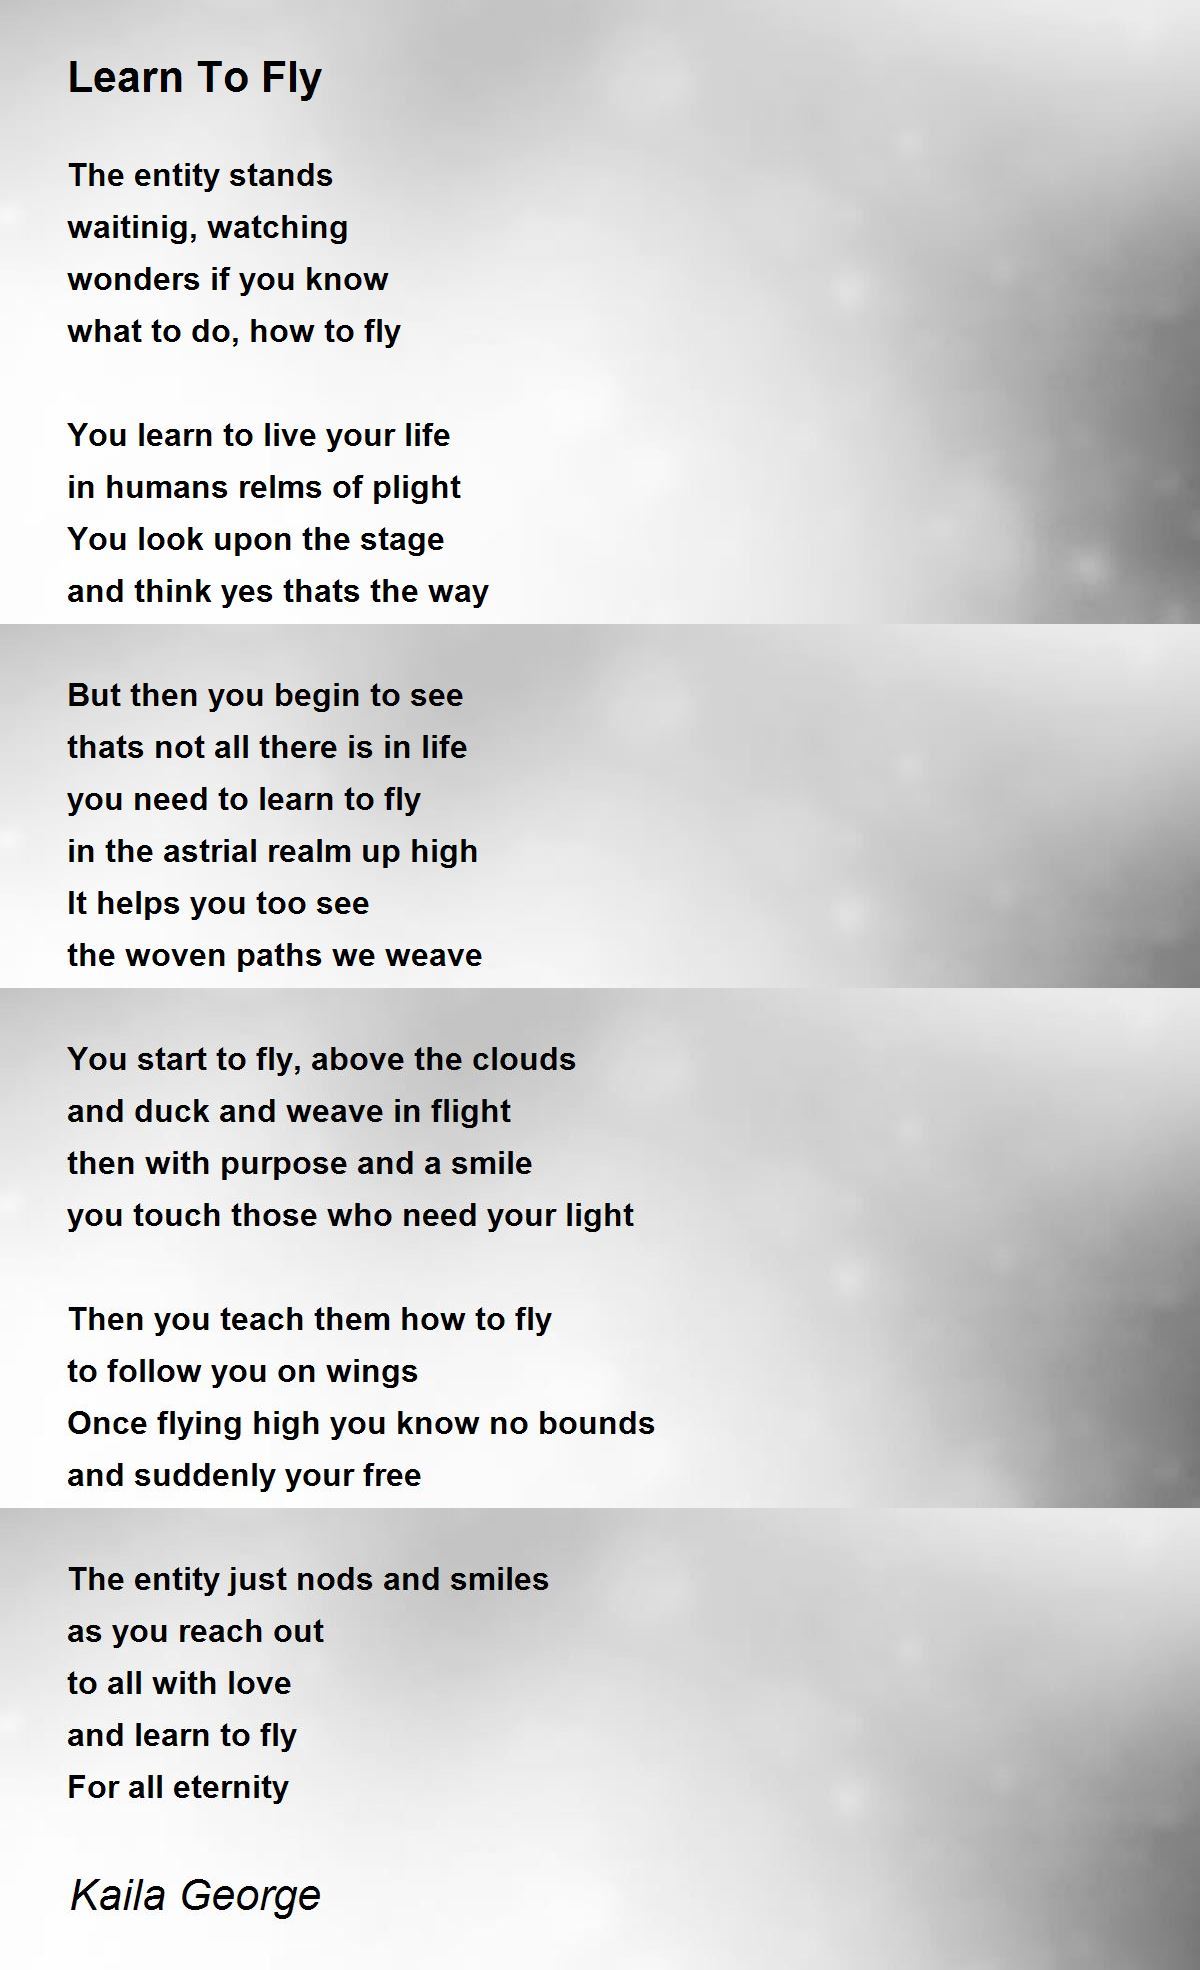 Learn To Fly - Learn To Fly Poem by Kaila George